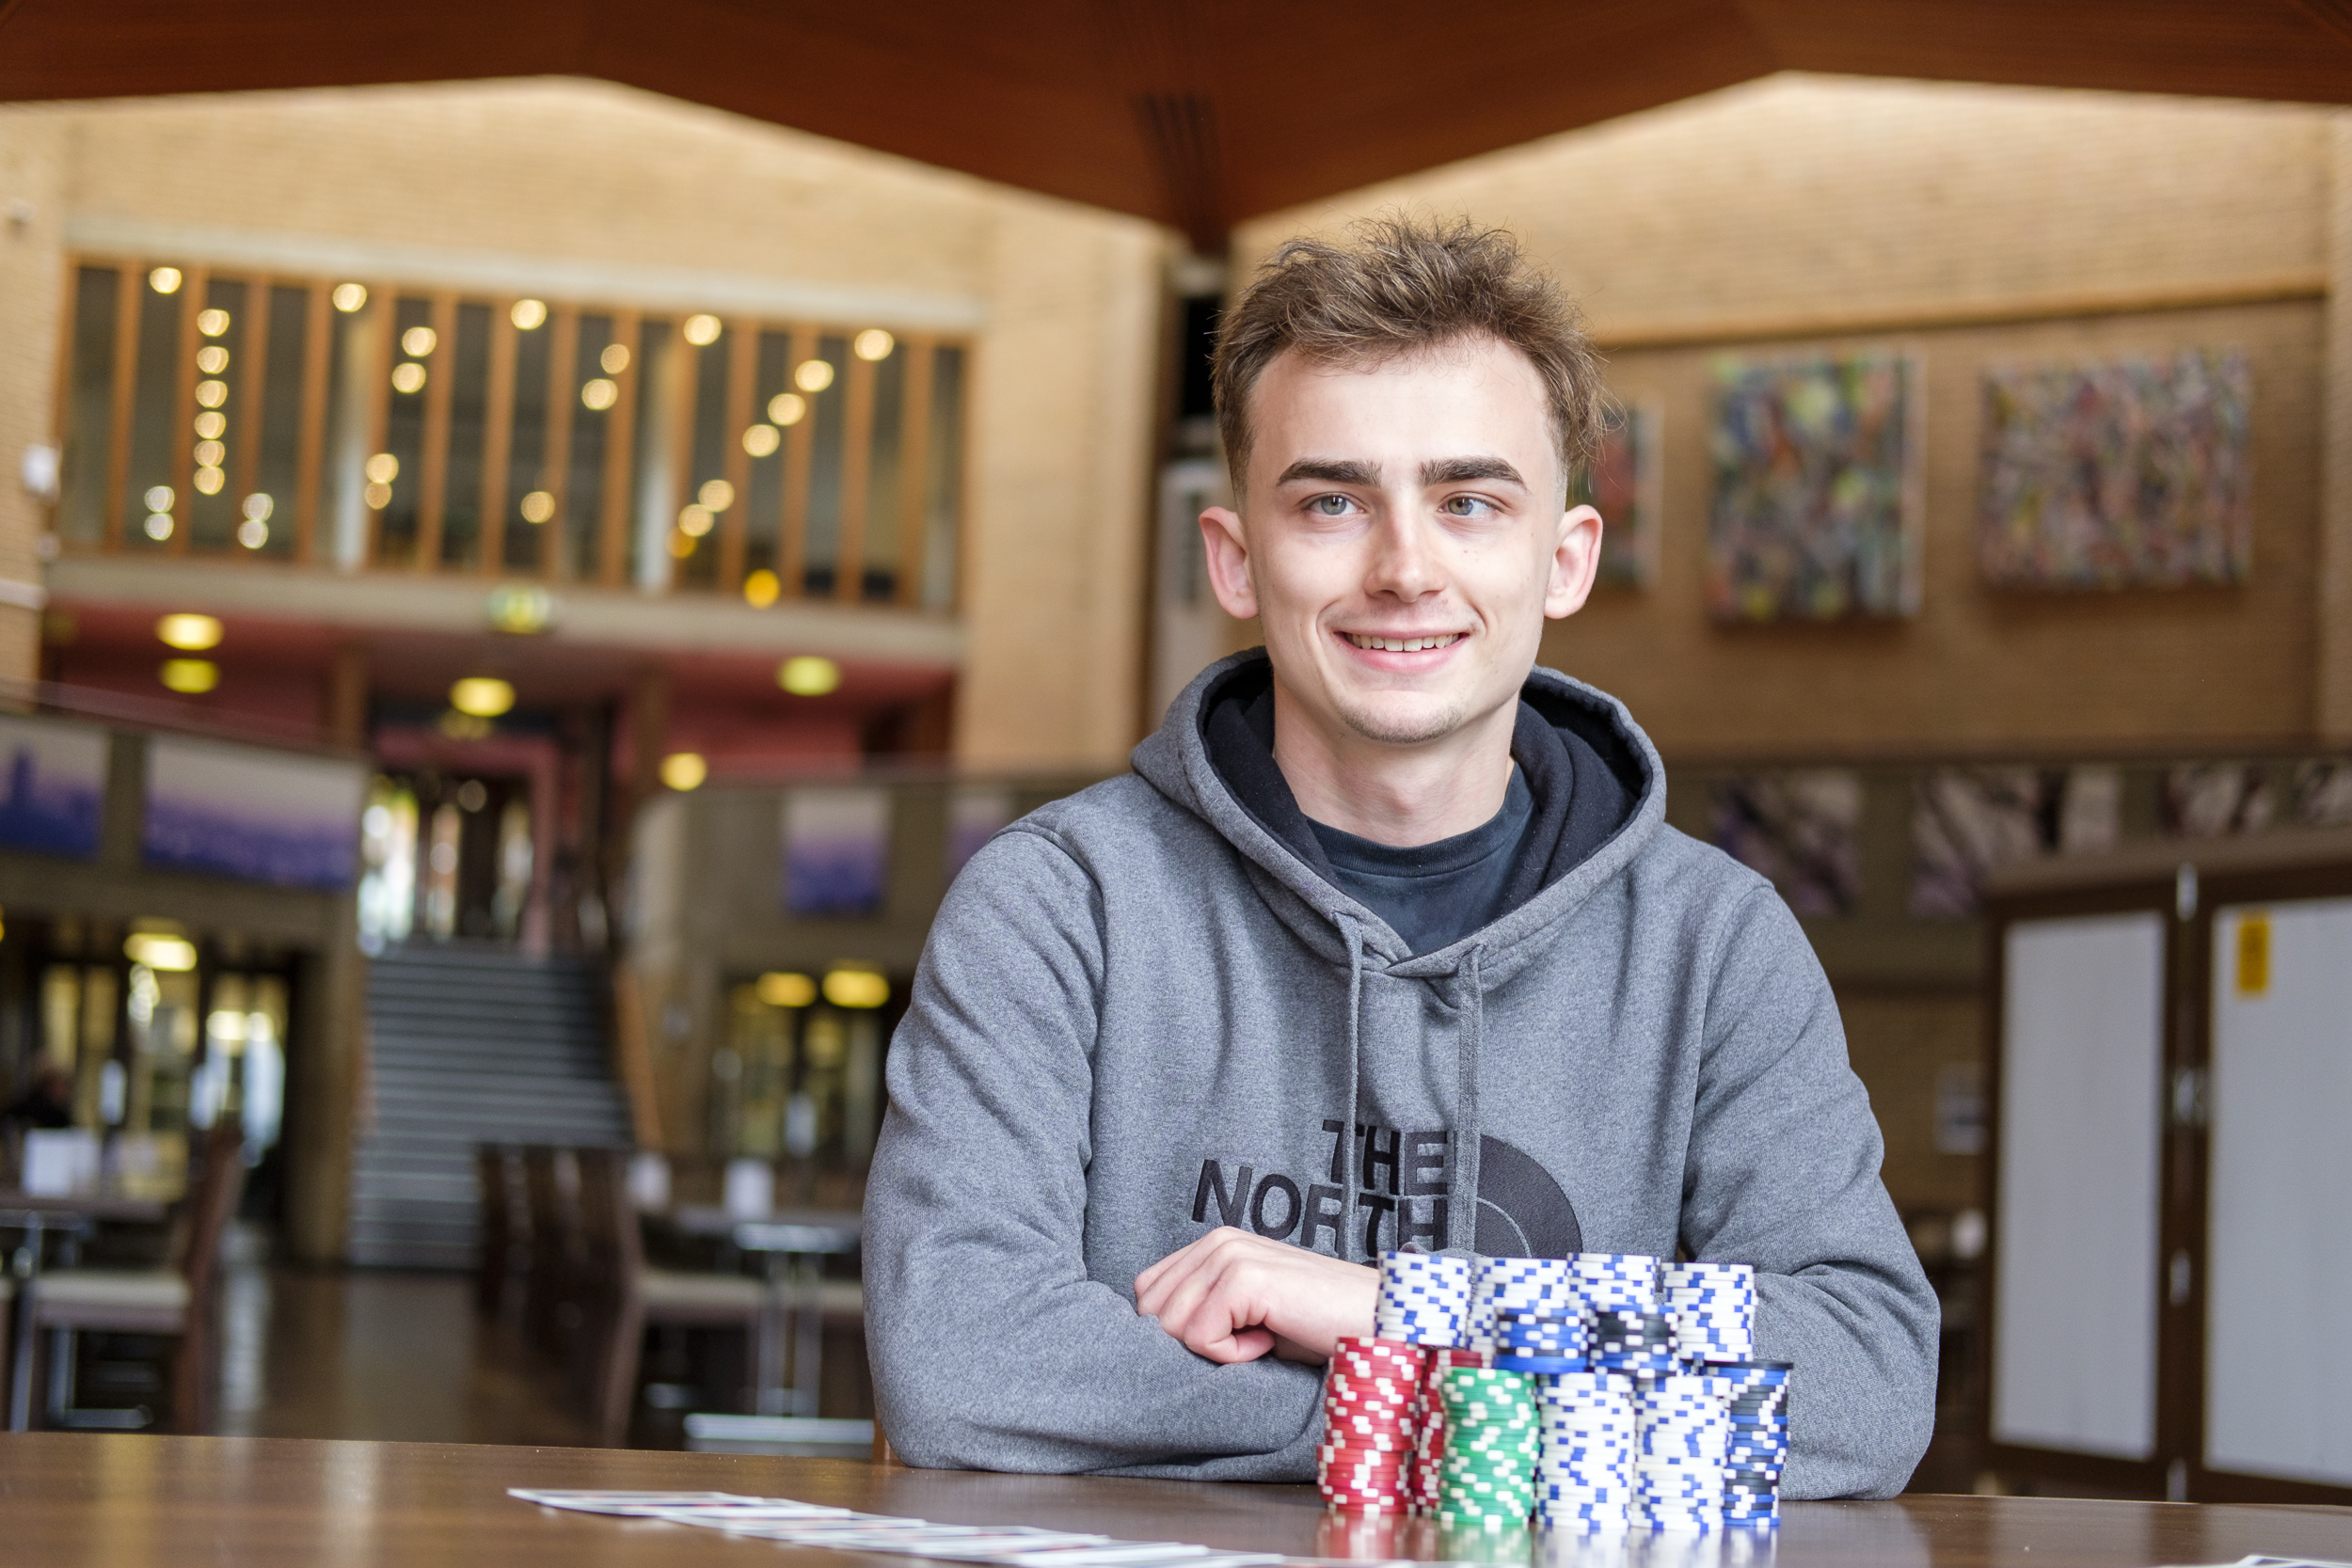 Student Lewis Powell smiling with poker chips on table in front of him